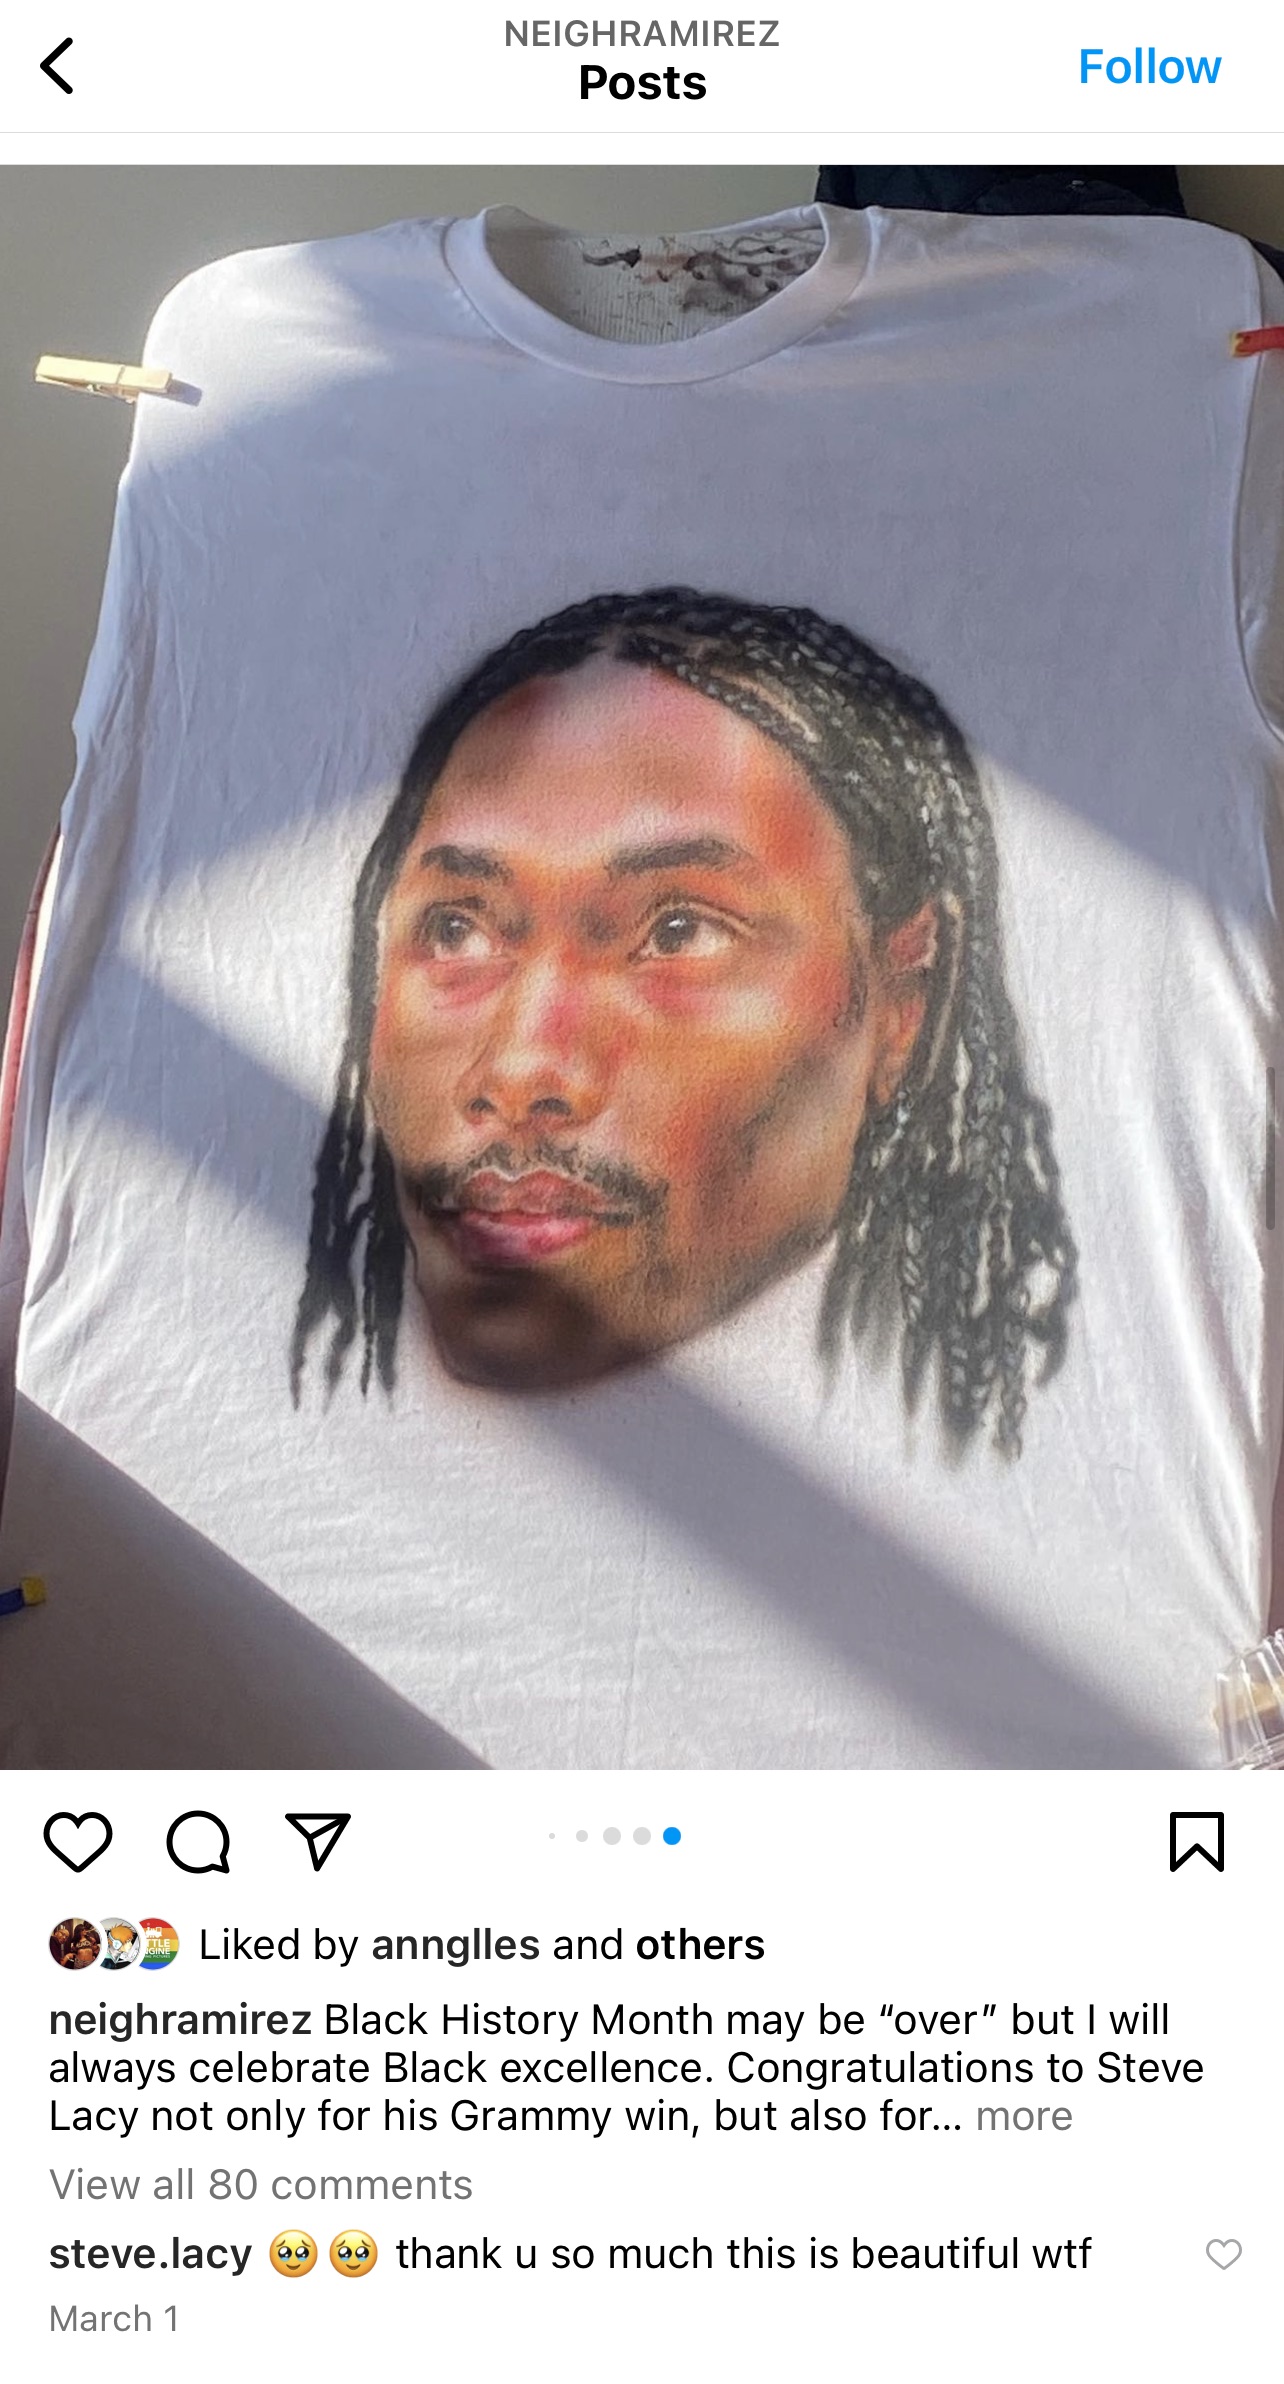 screenshot of Laneigh Ramirez' instagram account, feature an airbrush painting of artist Steve Lacy. 

TEXT IN IMAGE- "Black History Month may be "over" but I will always celebrate Black excellence. Congratulations to Steve Lacy not only for his grammy win, but also for..." 
